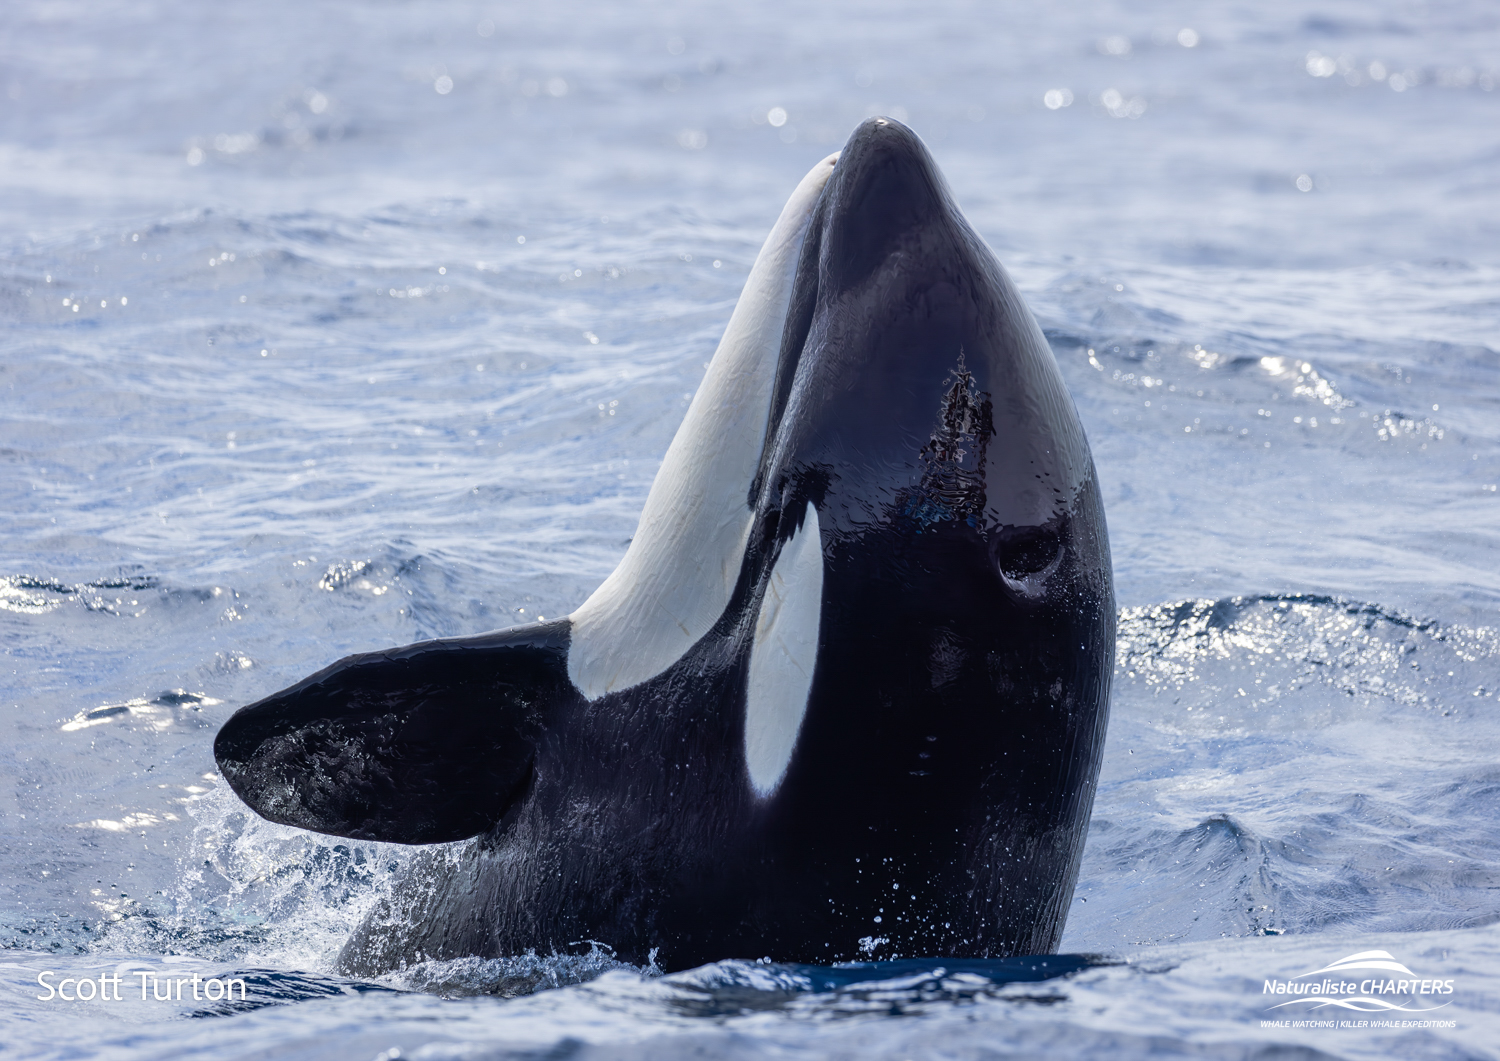 Orca in play mode after a successful hunt